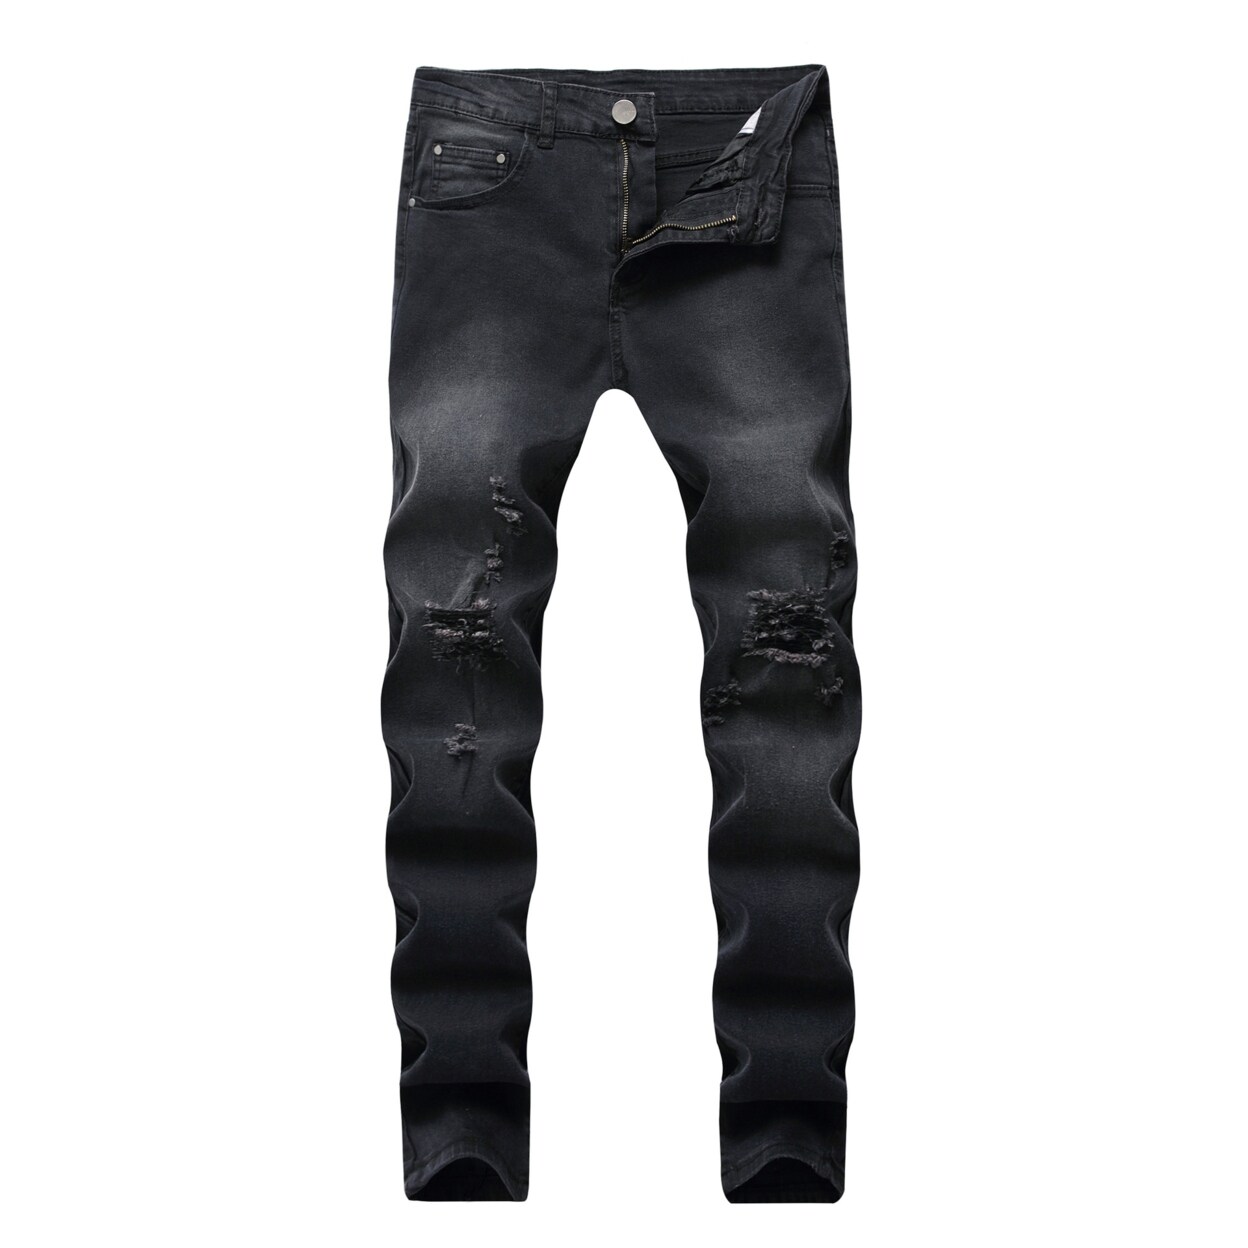 biker jeans with zippers and rips